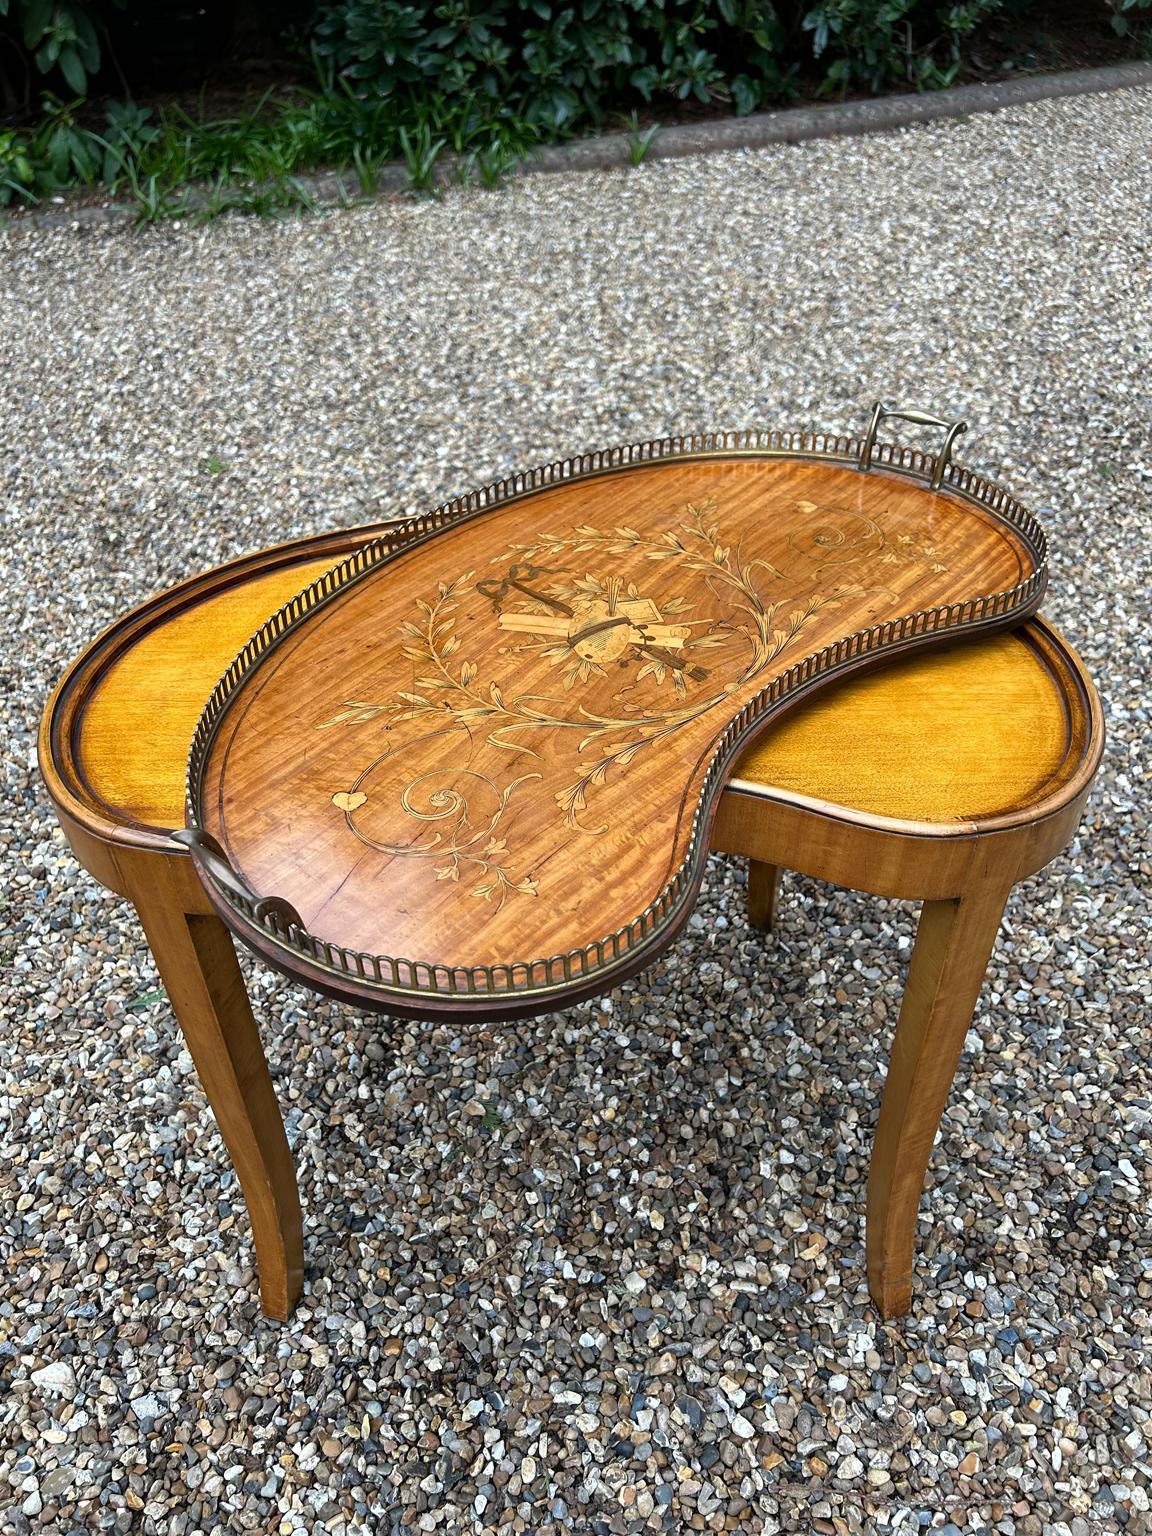 19th Century Inlaid Satinwood Tray on (Stand made later) For Sale 2